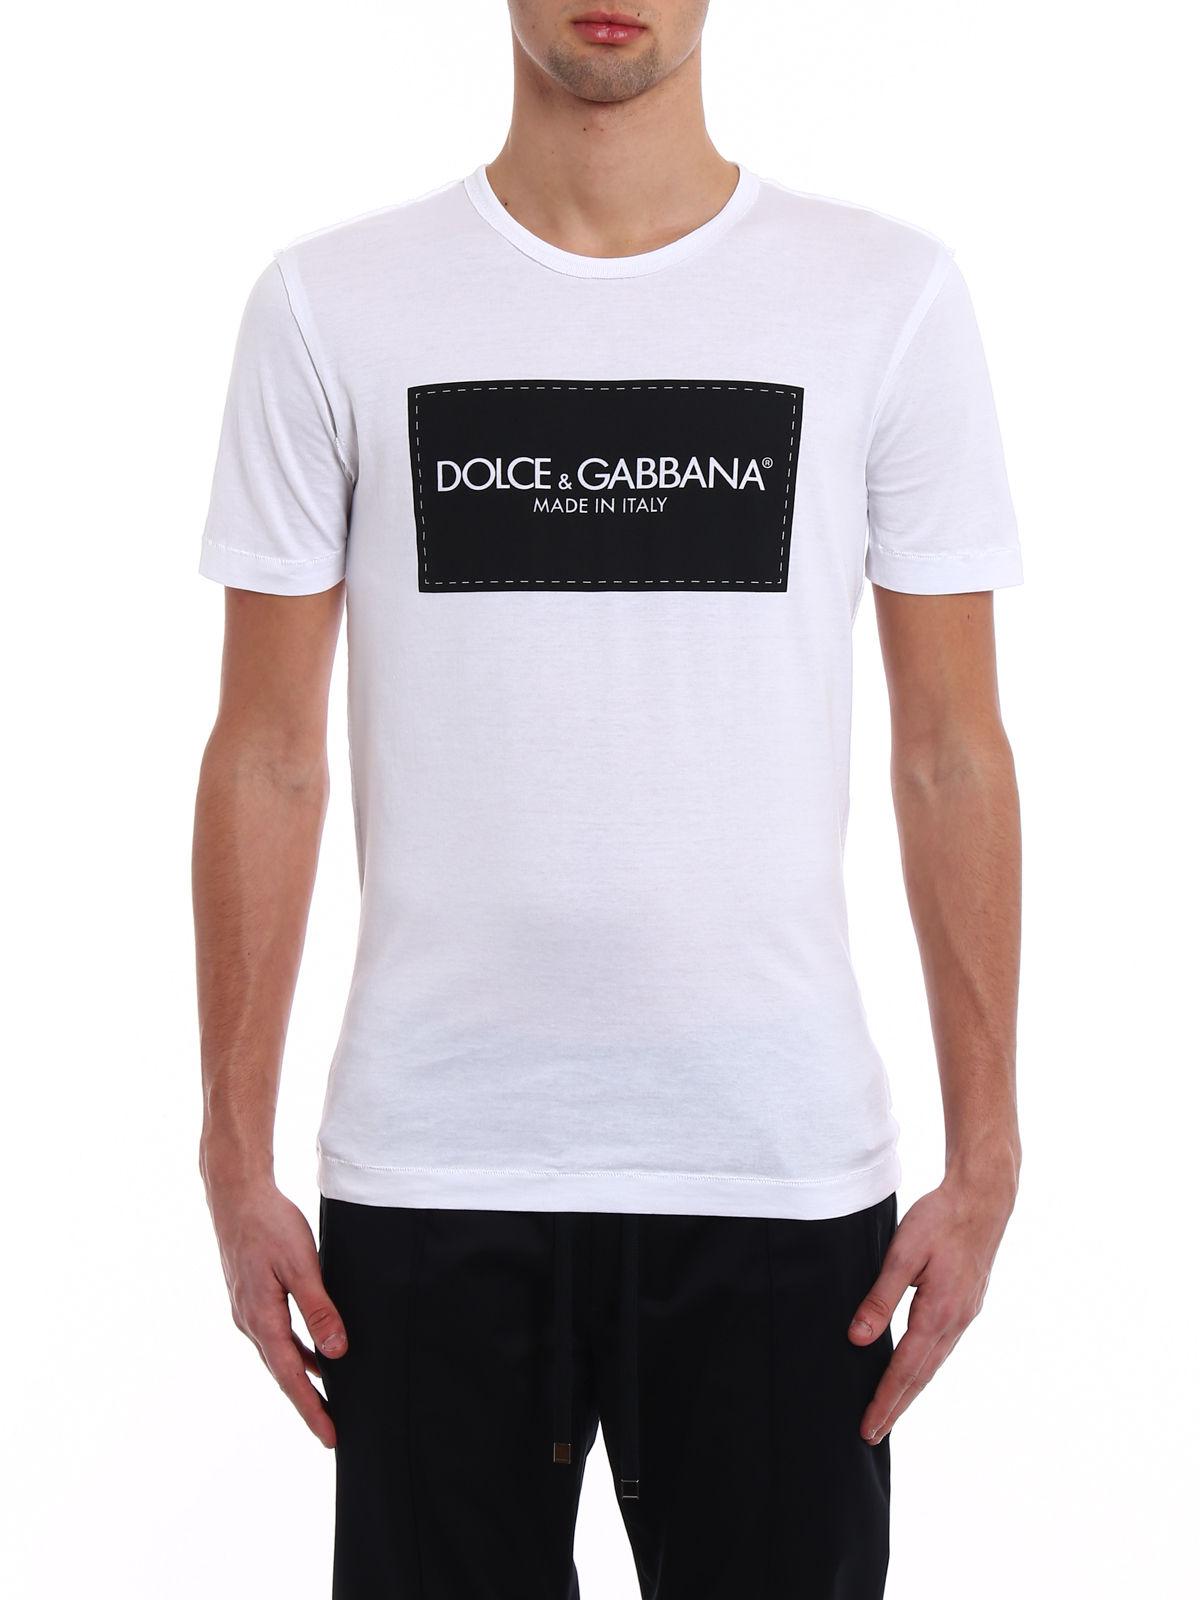 Dolce And Gabbana Dandg Made In Italy Print T Shirt In White For Men Lyst 